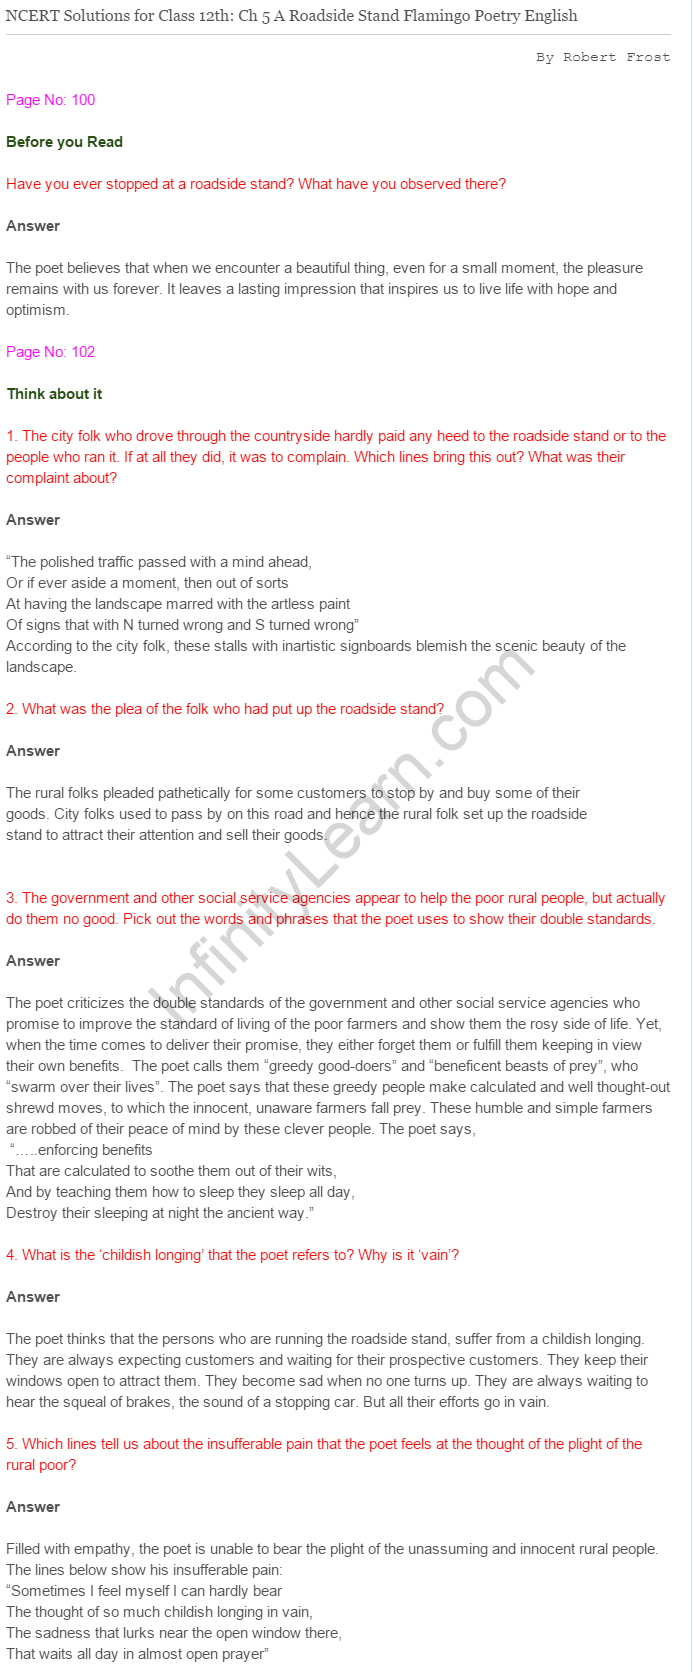 NCERT Solutions For Class 12 Flamingo English A Roadside Stand